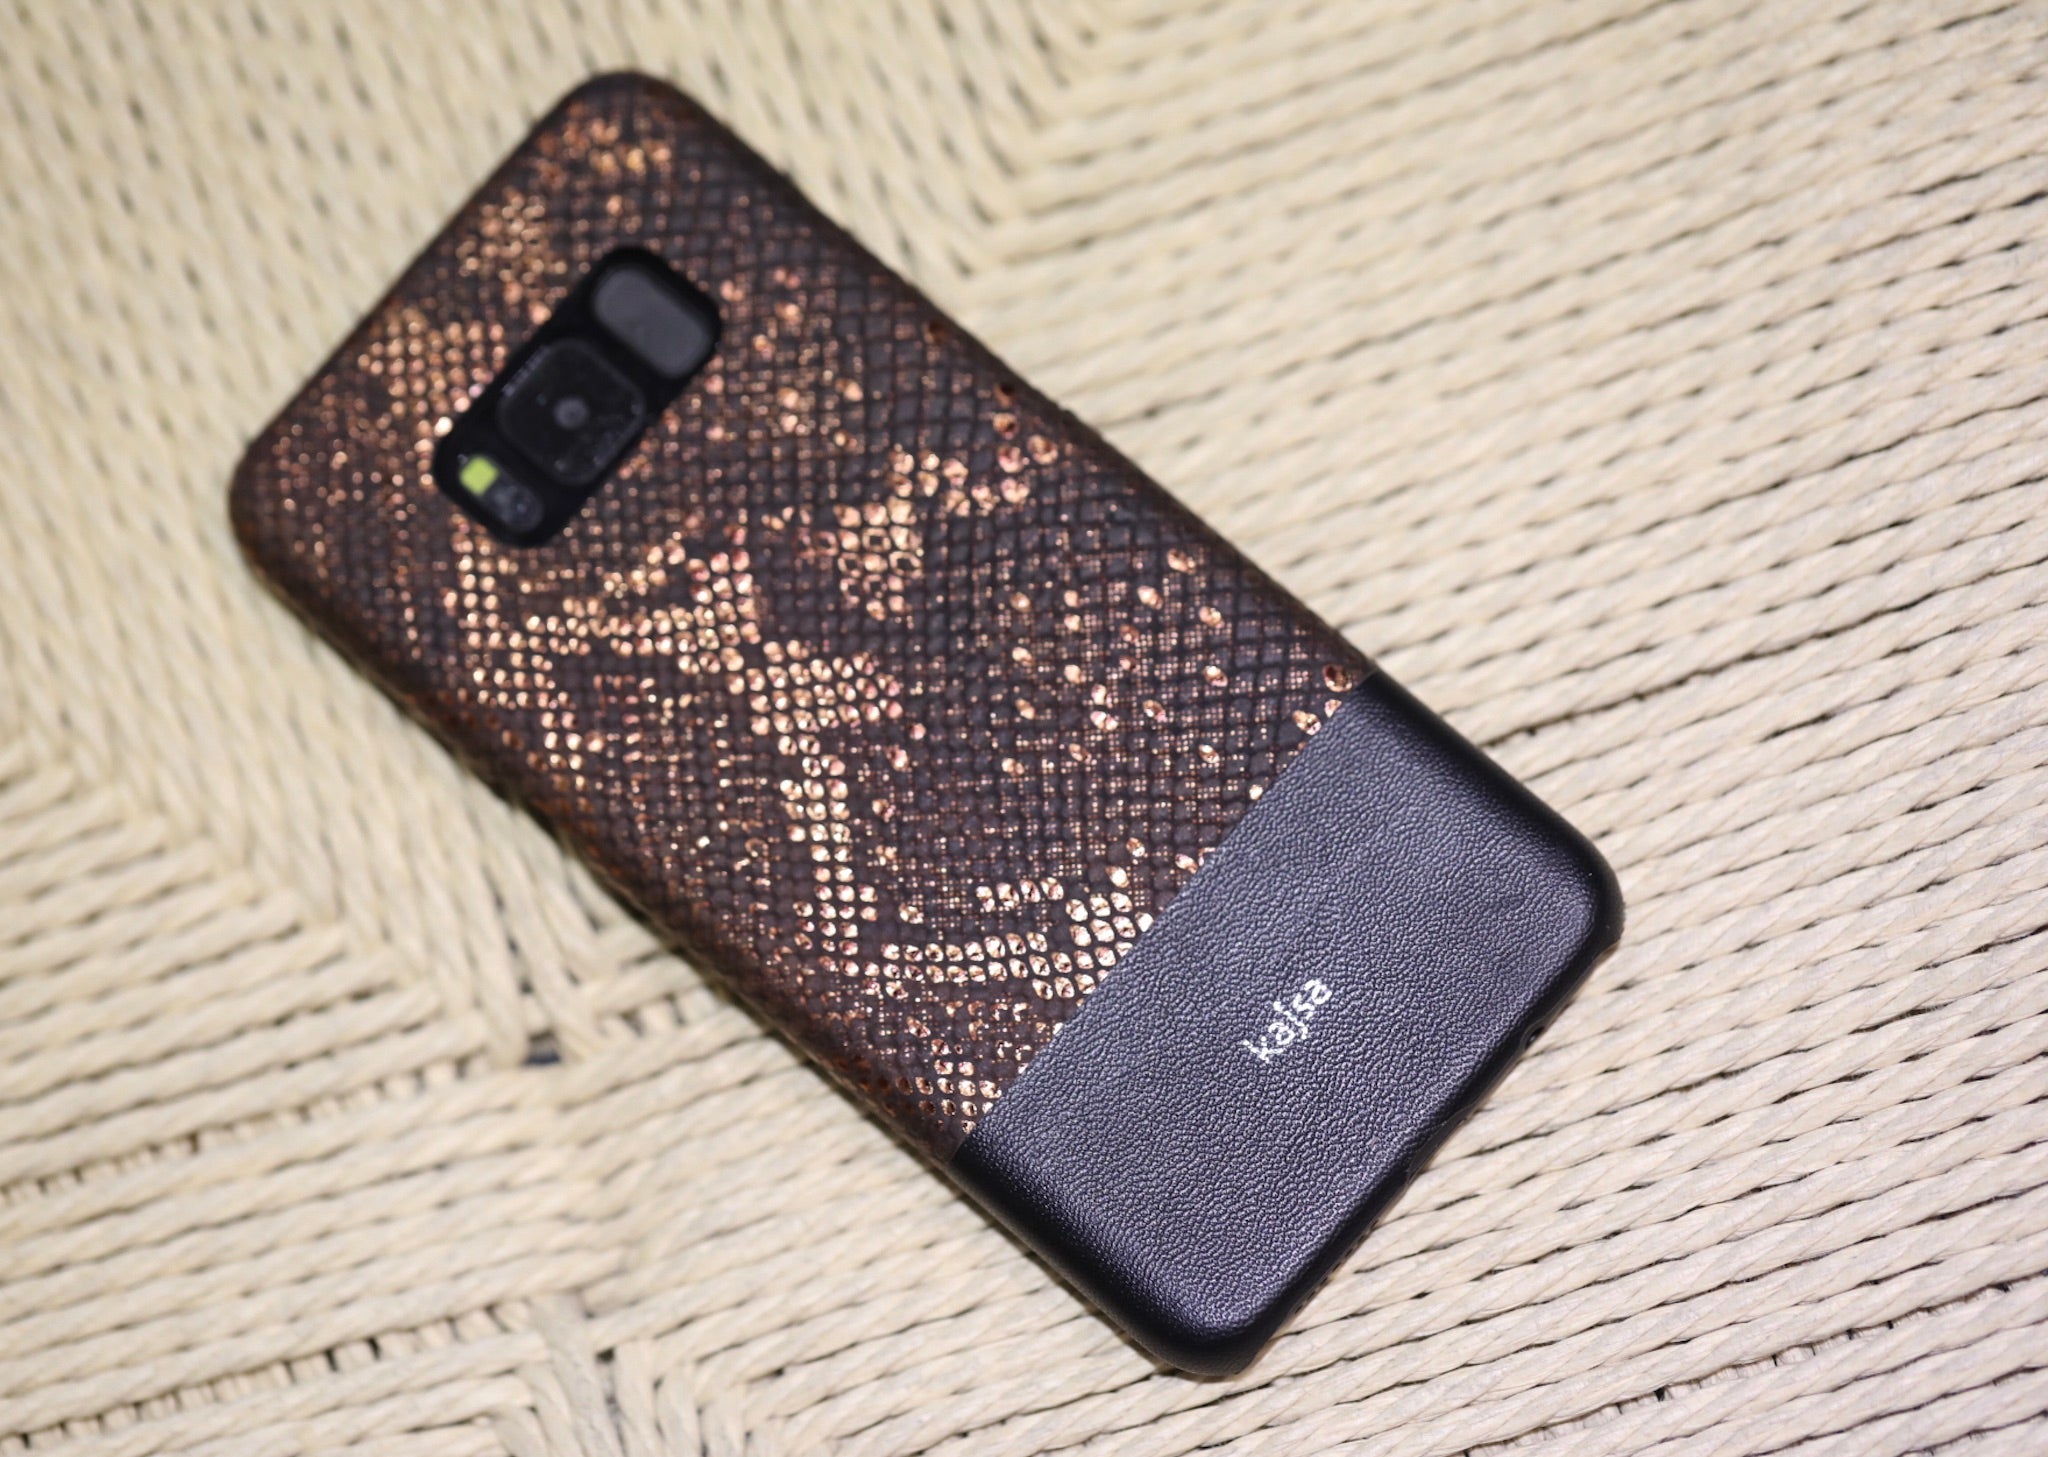 Glamorous Collection - Snakeskin pattern PU for Samsung Galaxy S8/S8 Plus-Phone Case- phone case - phone cases- phone cover- iphone cover- iphone case- iphone cases- leather case- leather cases- DIYCASE - custom case - leather cover - hand strap case - croco pattern case - snake pattern case - carbon fiber phone case - phone case brand - unique phone case - high quality - phone case brand - protective case - buy phone case hong kong - online buy phone case - iphone‎手機殼 - 客製化手機殼 - samsung ‎手機殼 - 香港手機殼 - 買電話殼